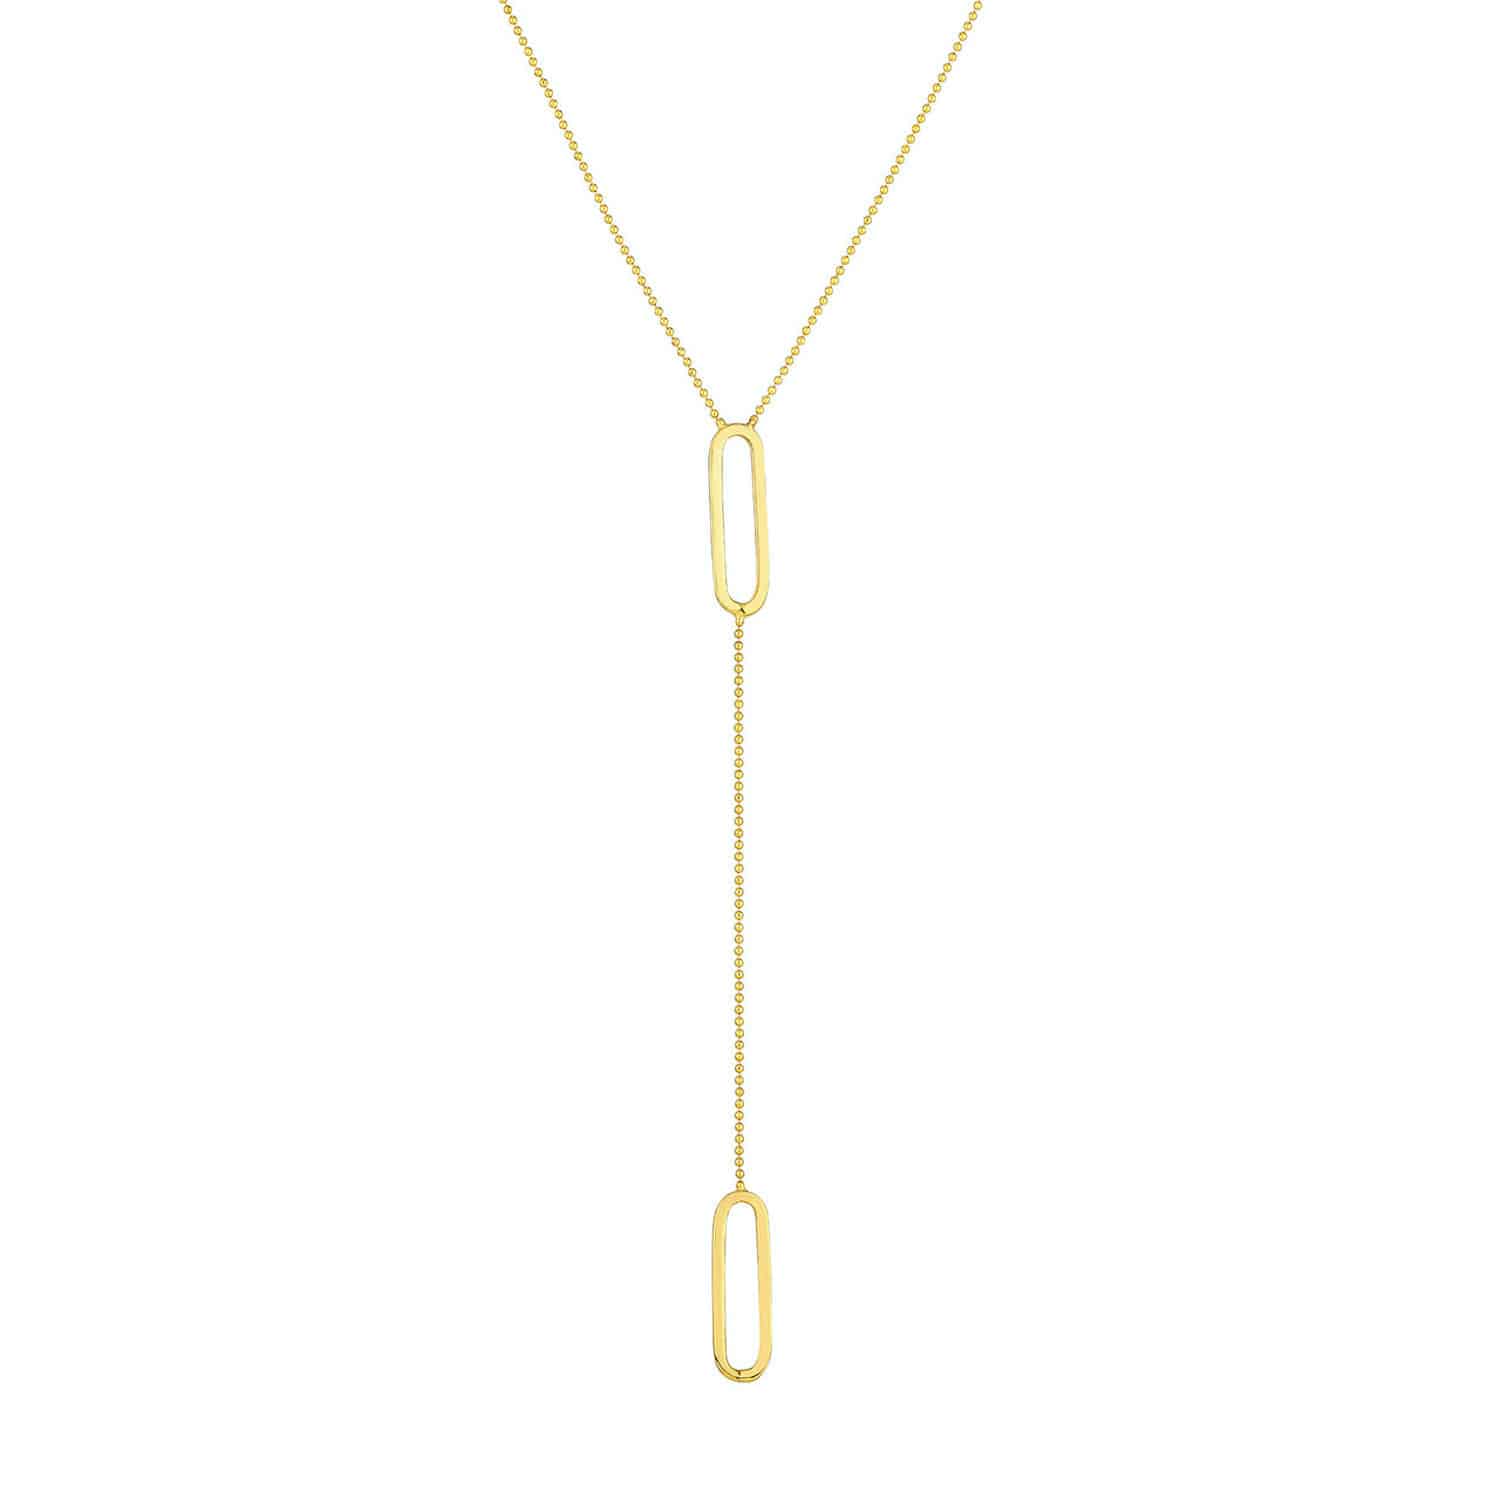 14K Yellow Gold Ball Bead Paperclip Pendant Y-Shaped Necklace 18"